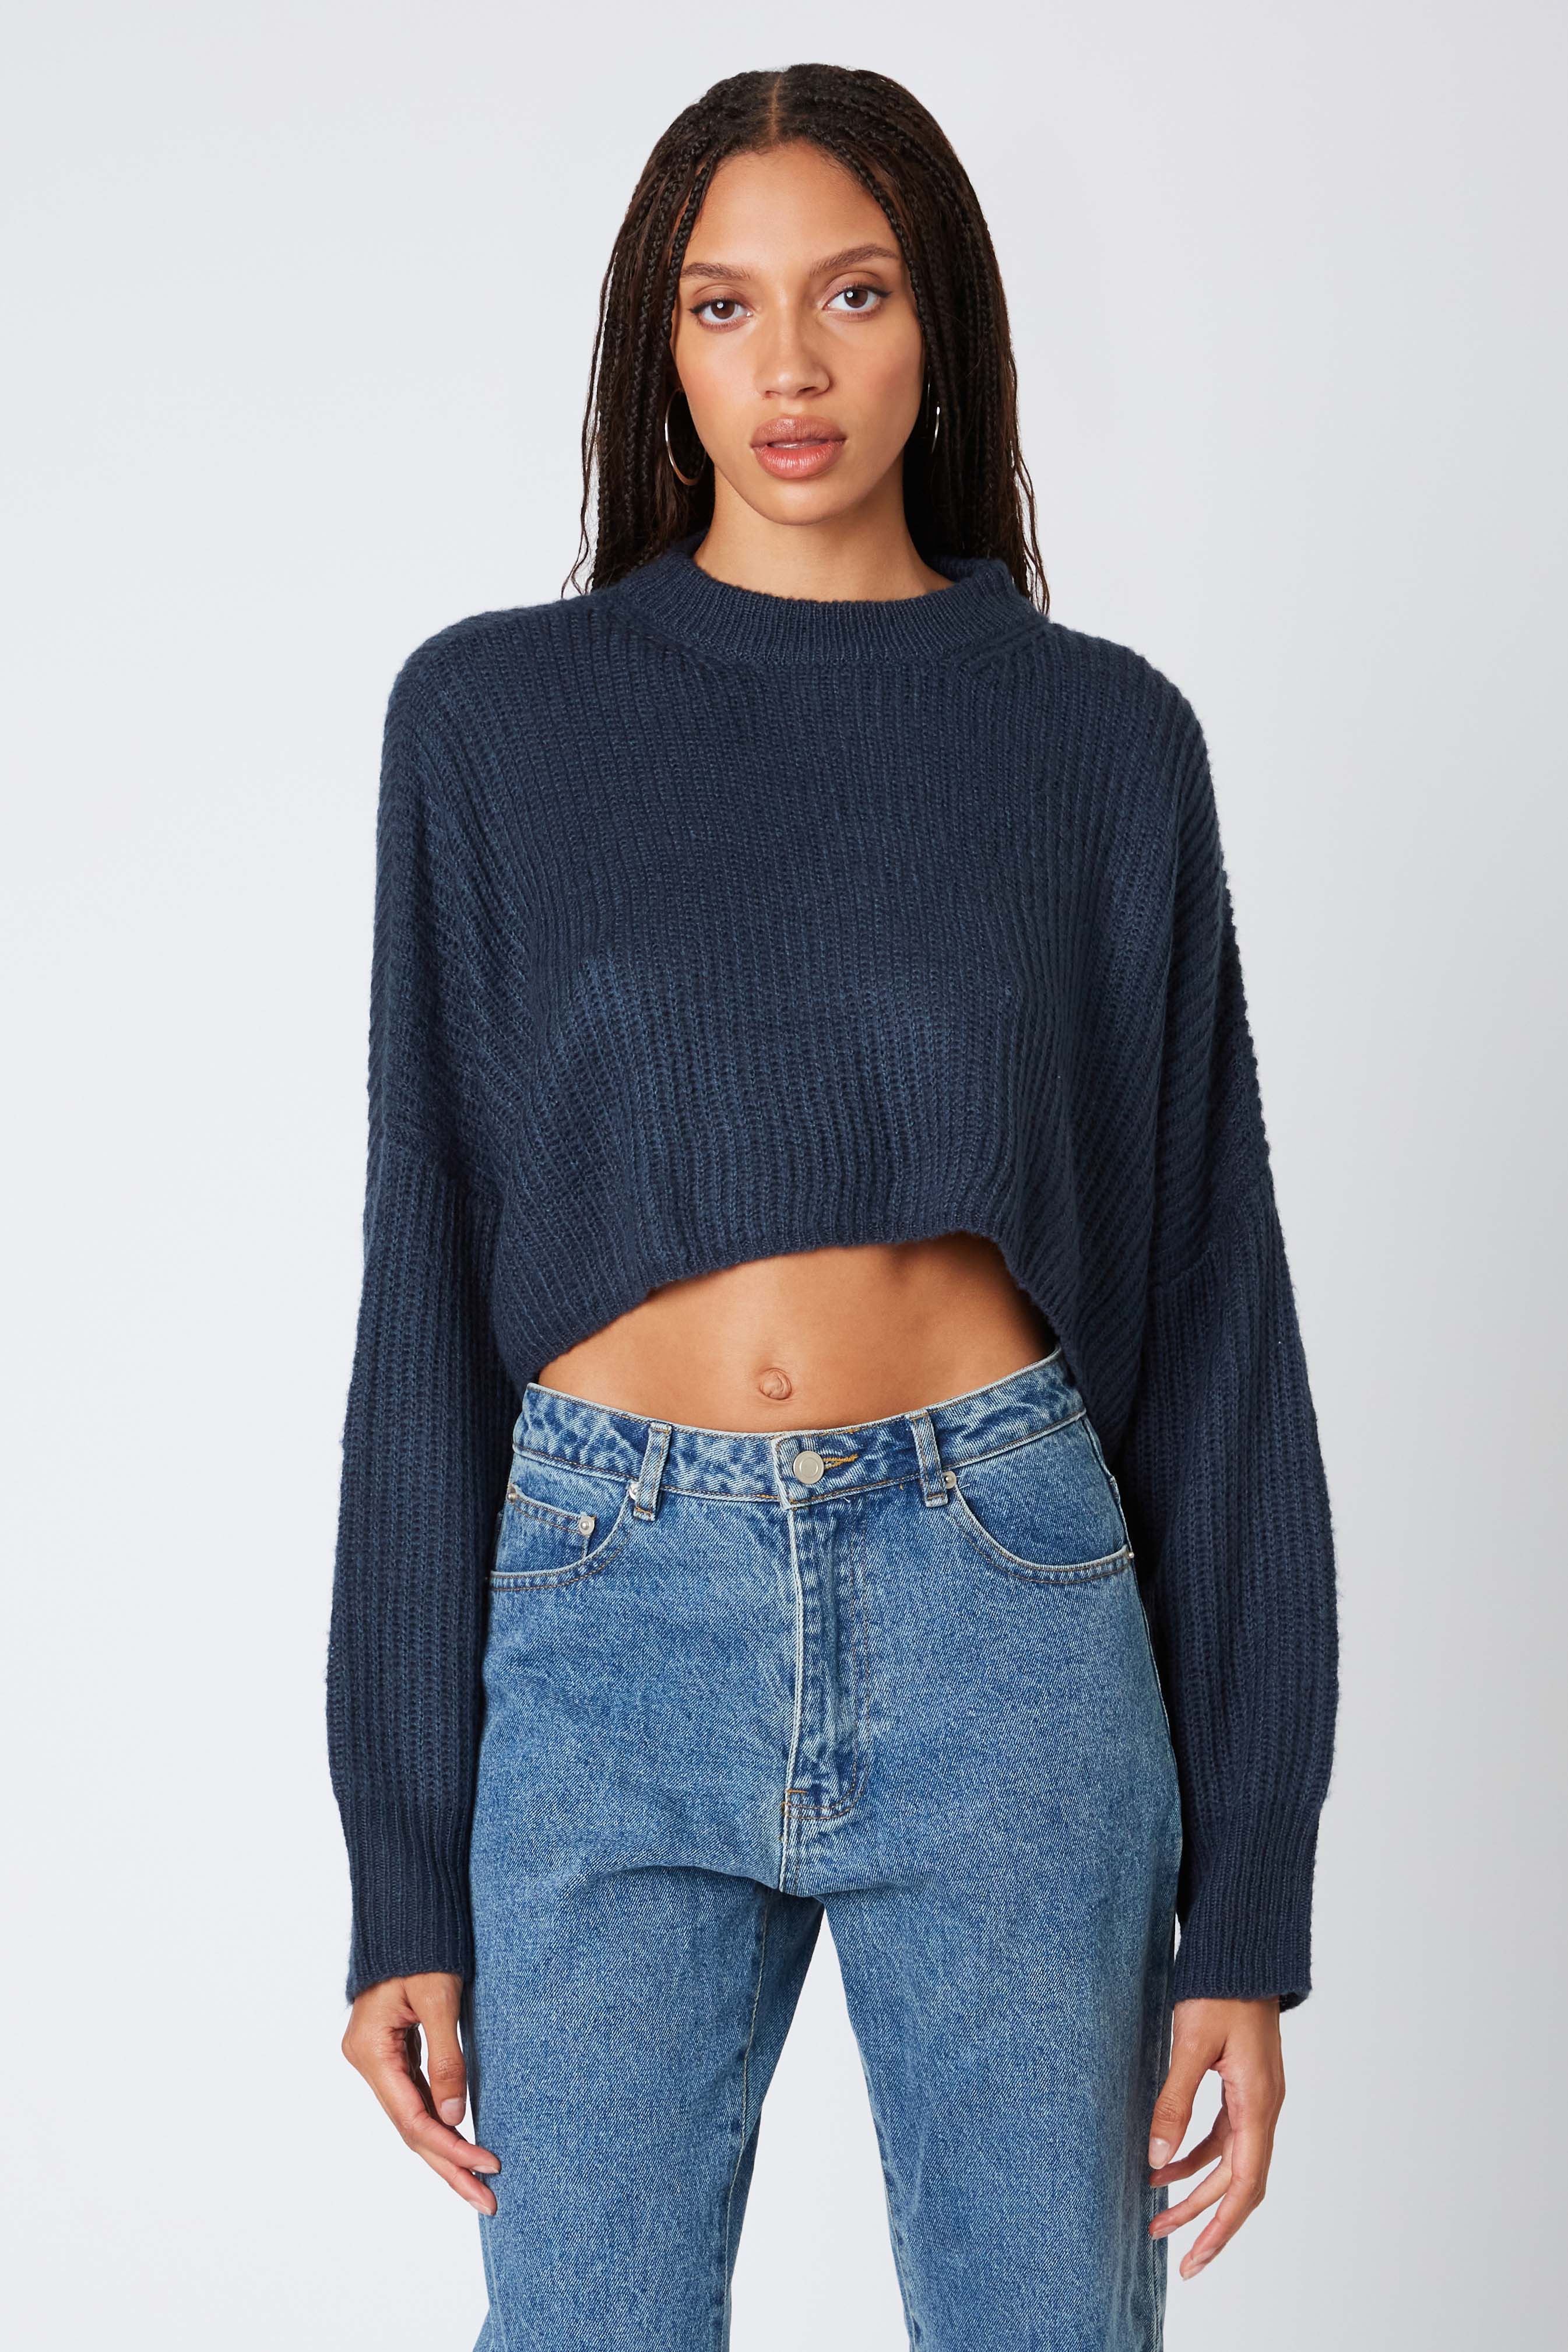 Cropped Mockneck Sweater in Dusk Front View